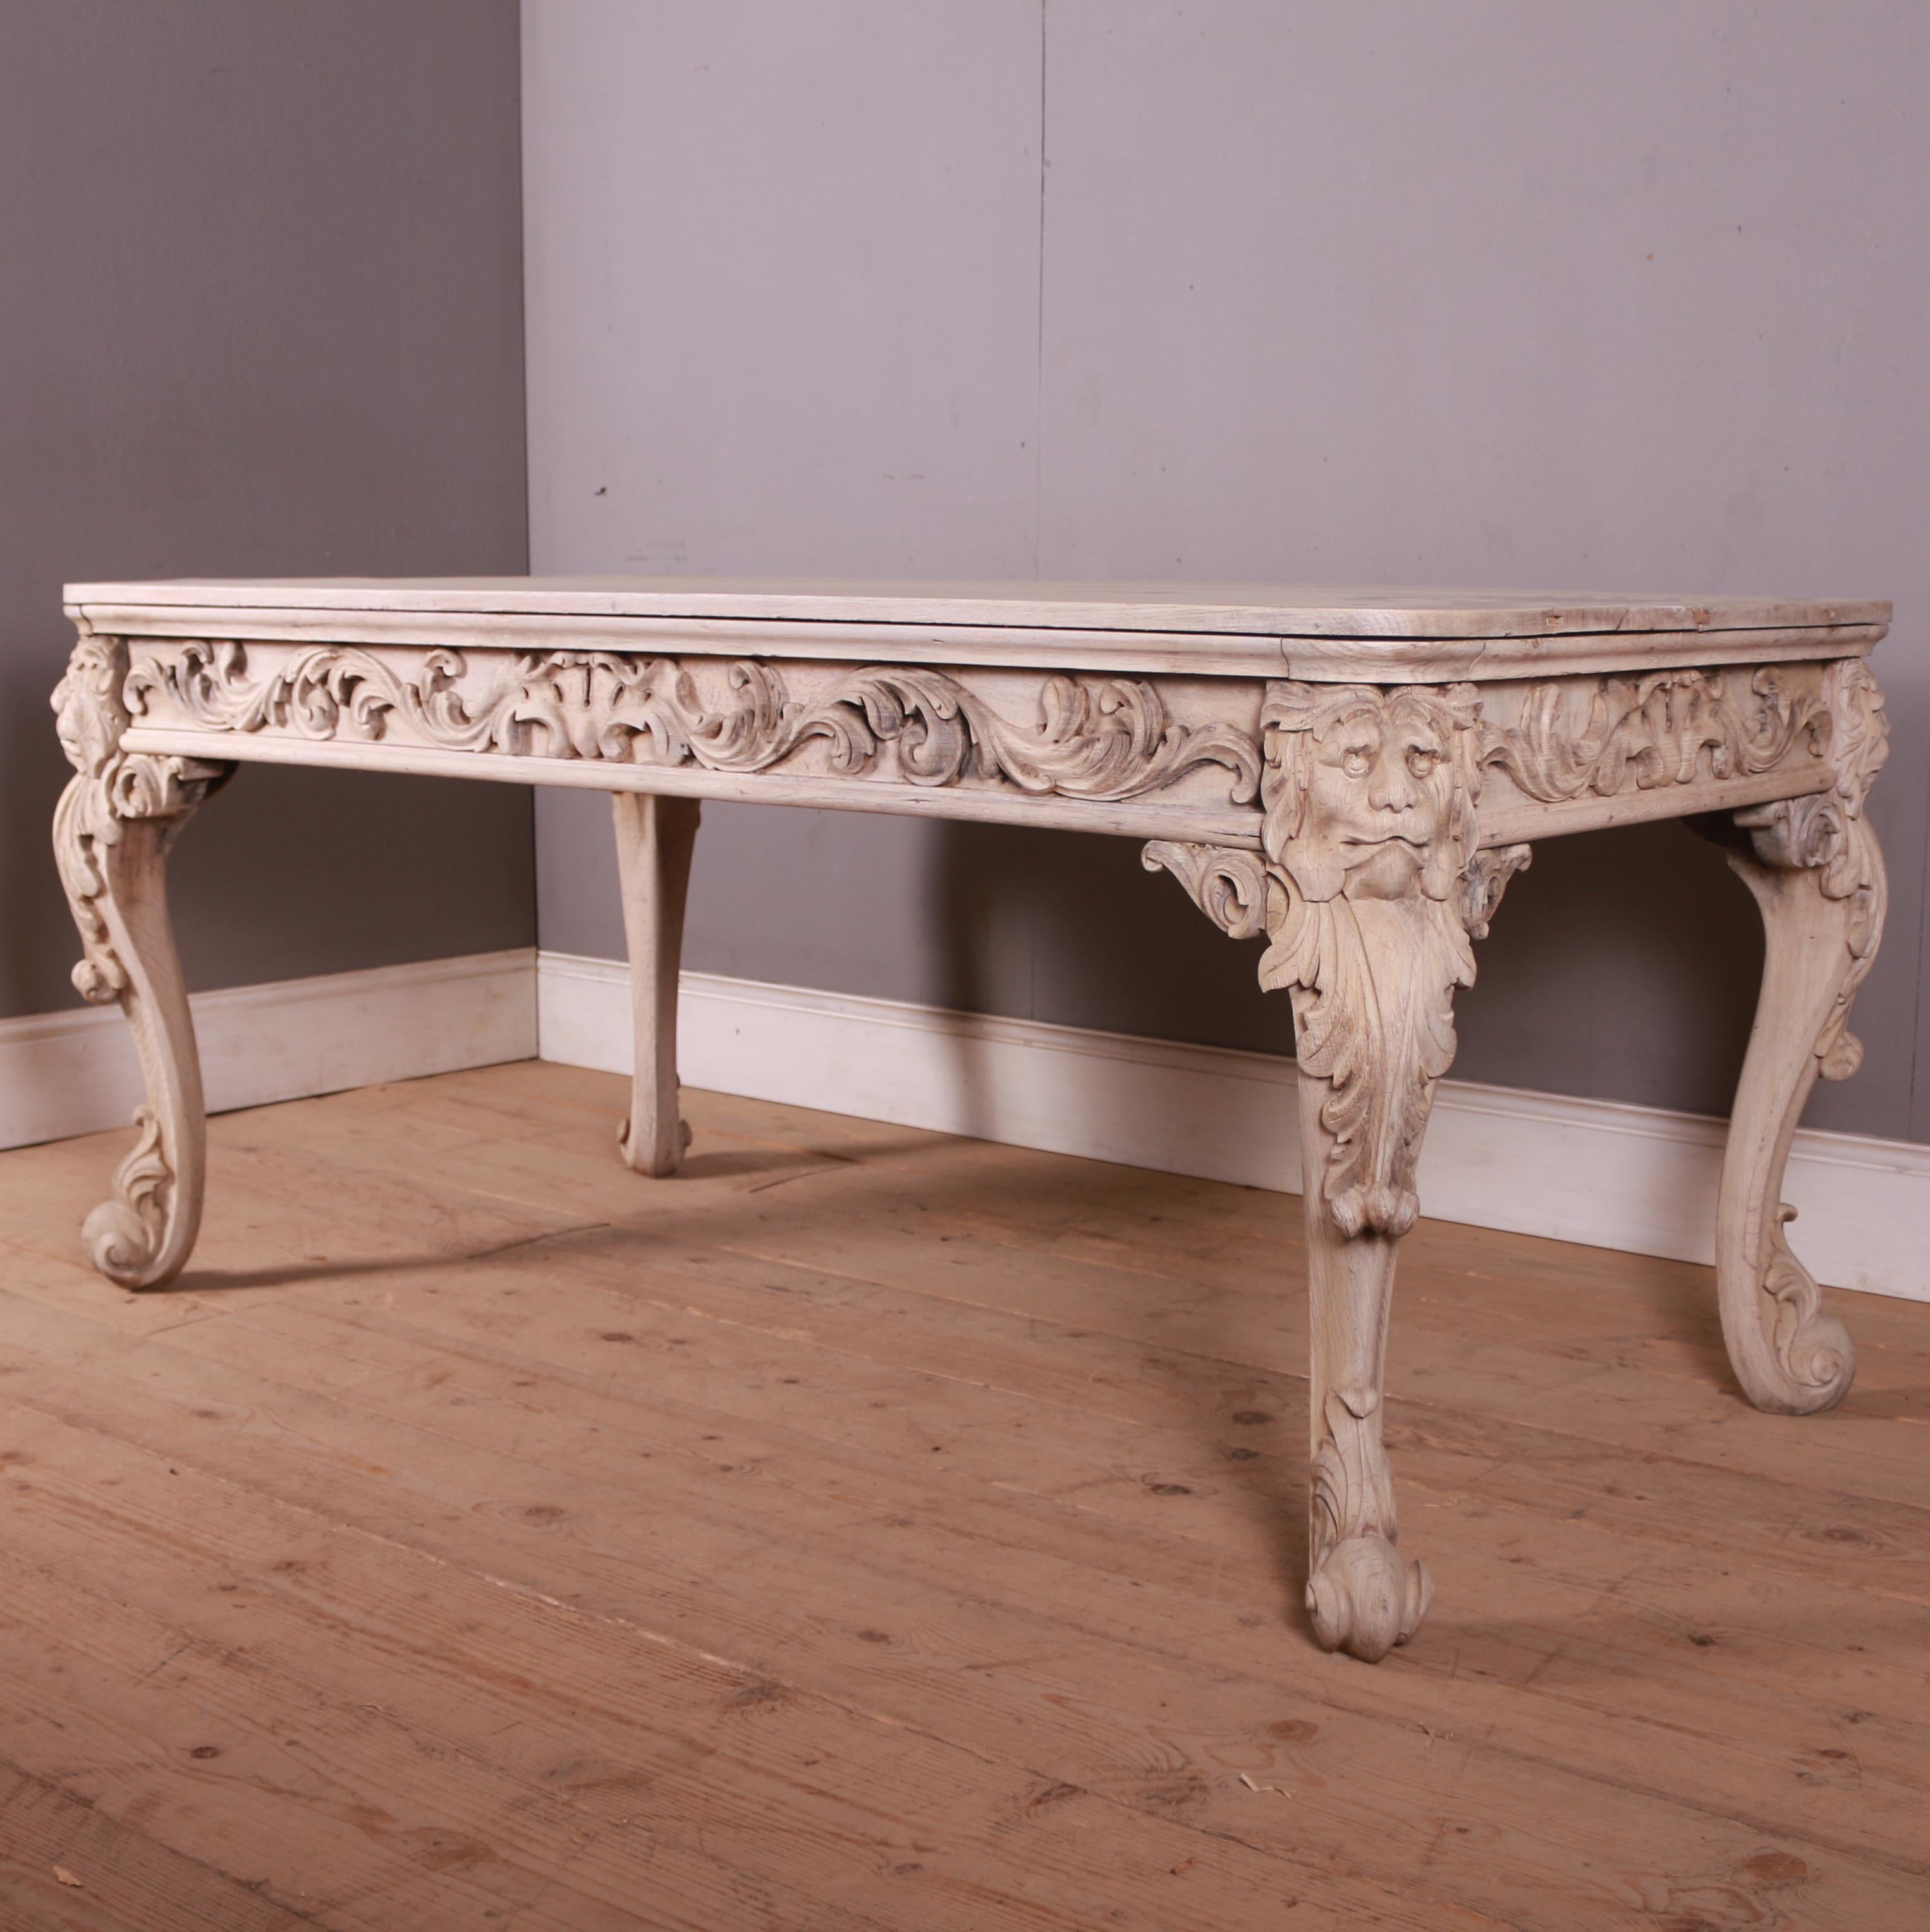 Large 19th C carved and bleached oak desk / centre table. 1880

Clearance is 23.5